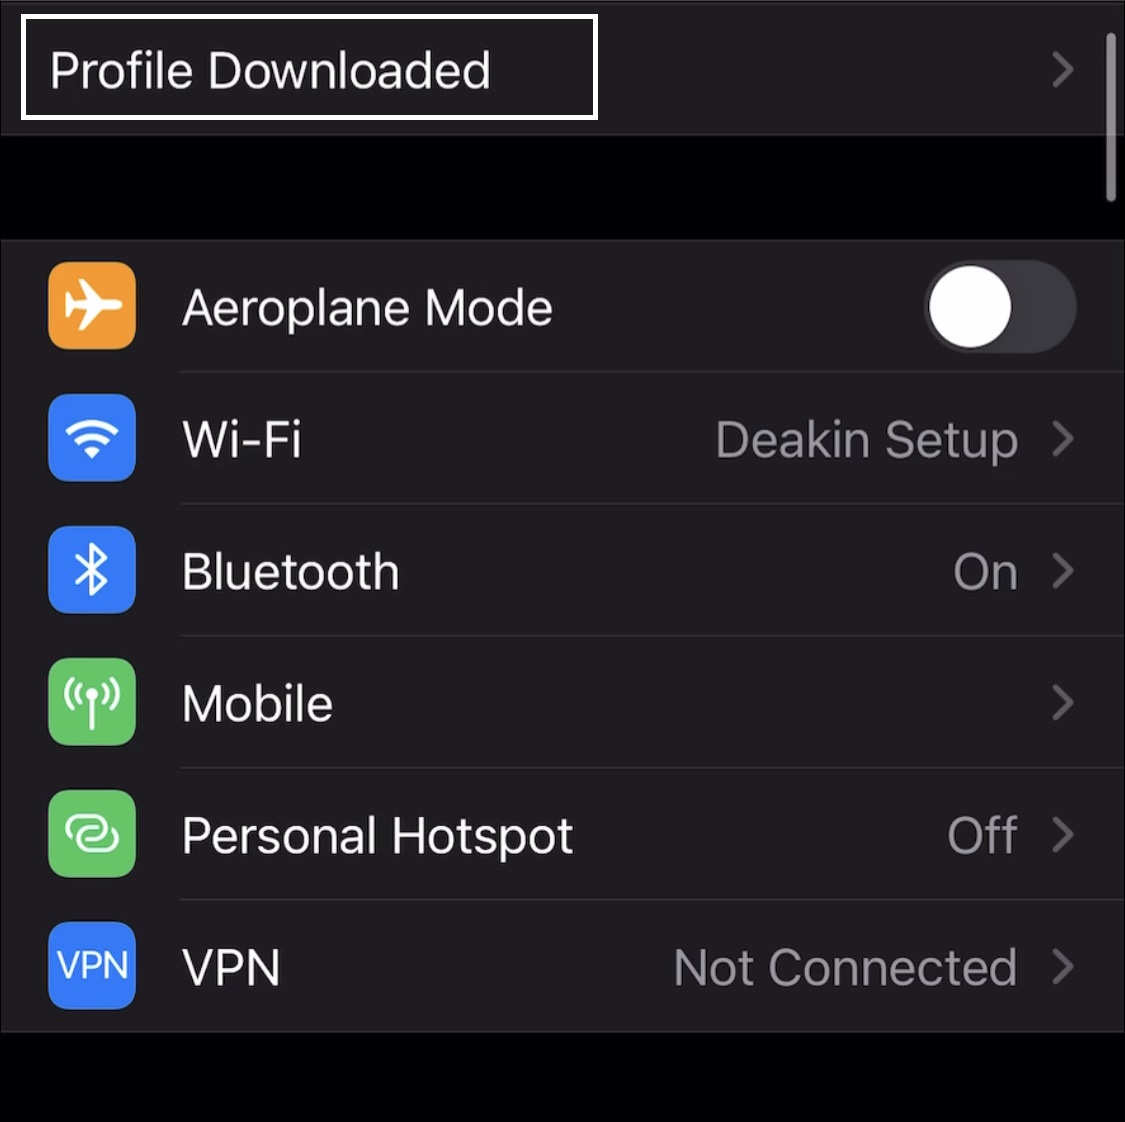 Settings app with Profile Downloaded menu outlined in white